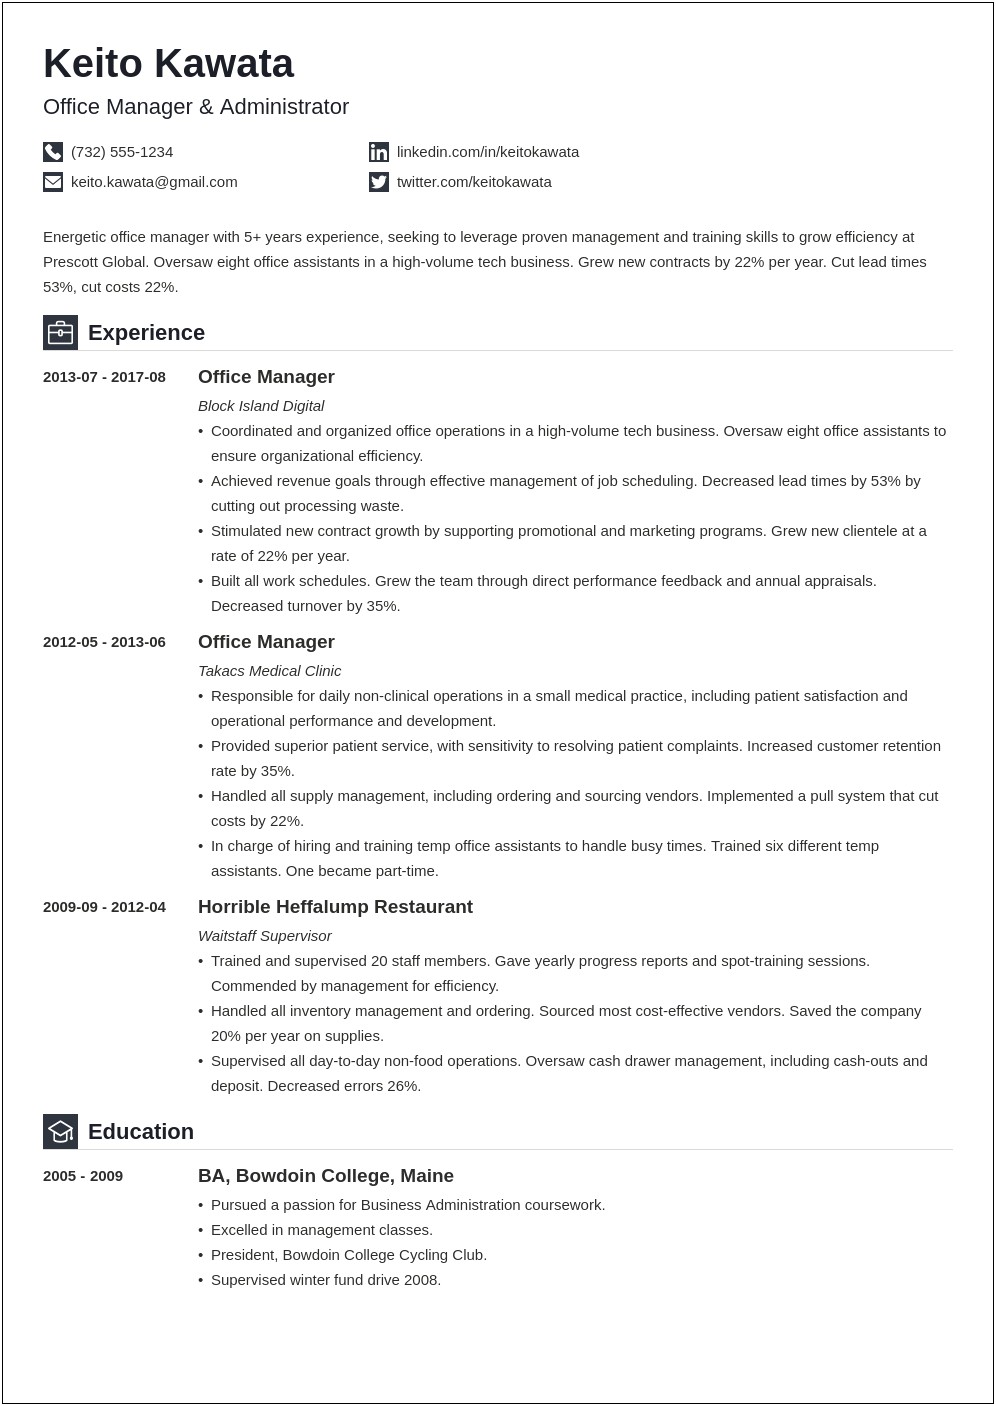 Duties Summary For Facility Manager Resume